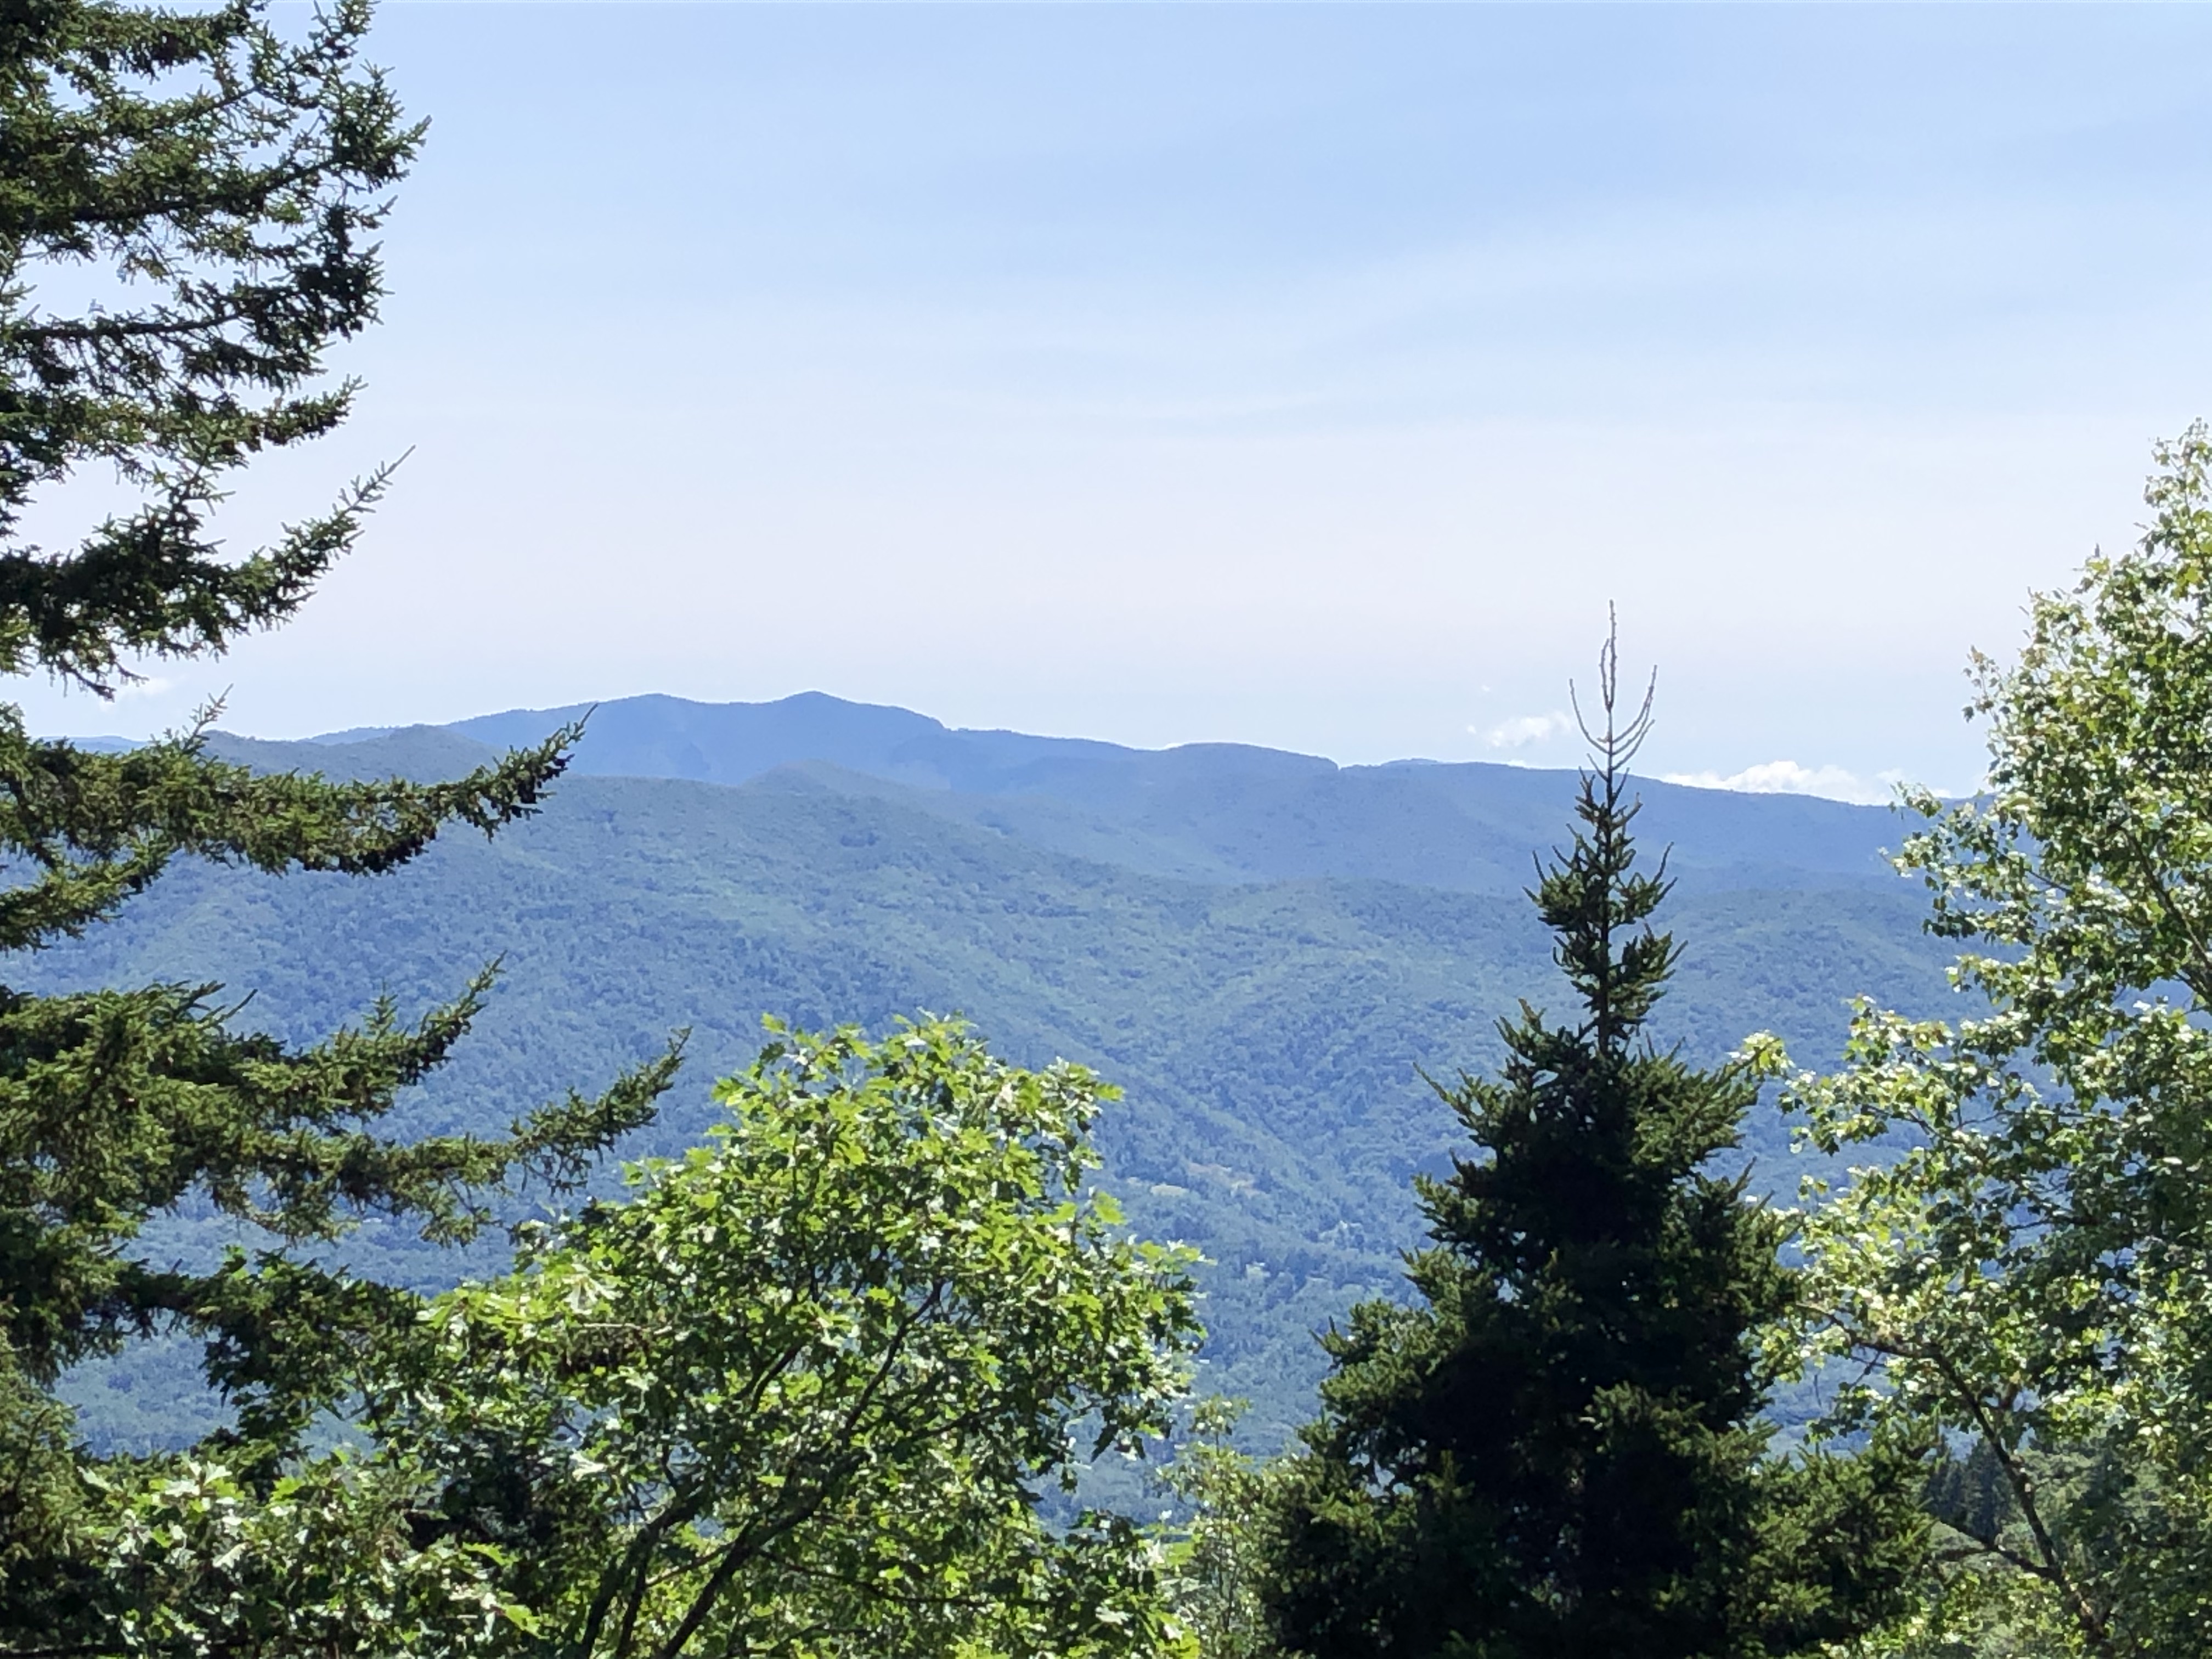 Come see one of the highest private lots available in the Blue Ridge with a peak elevation of 5,550ft! 